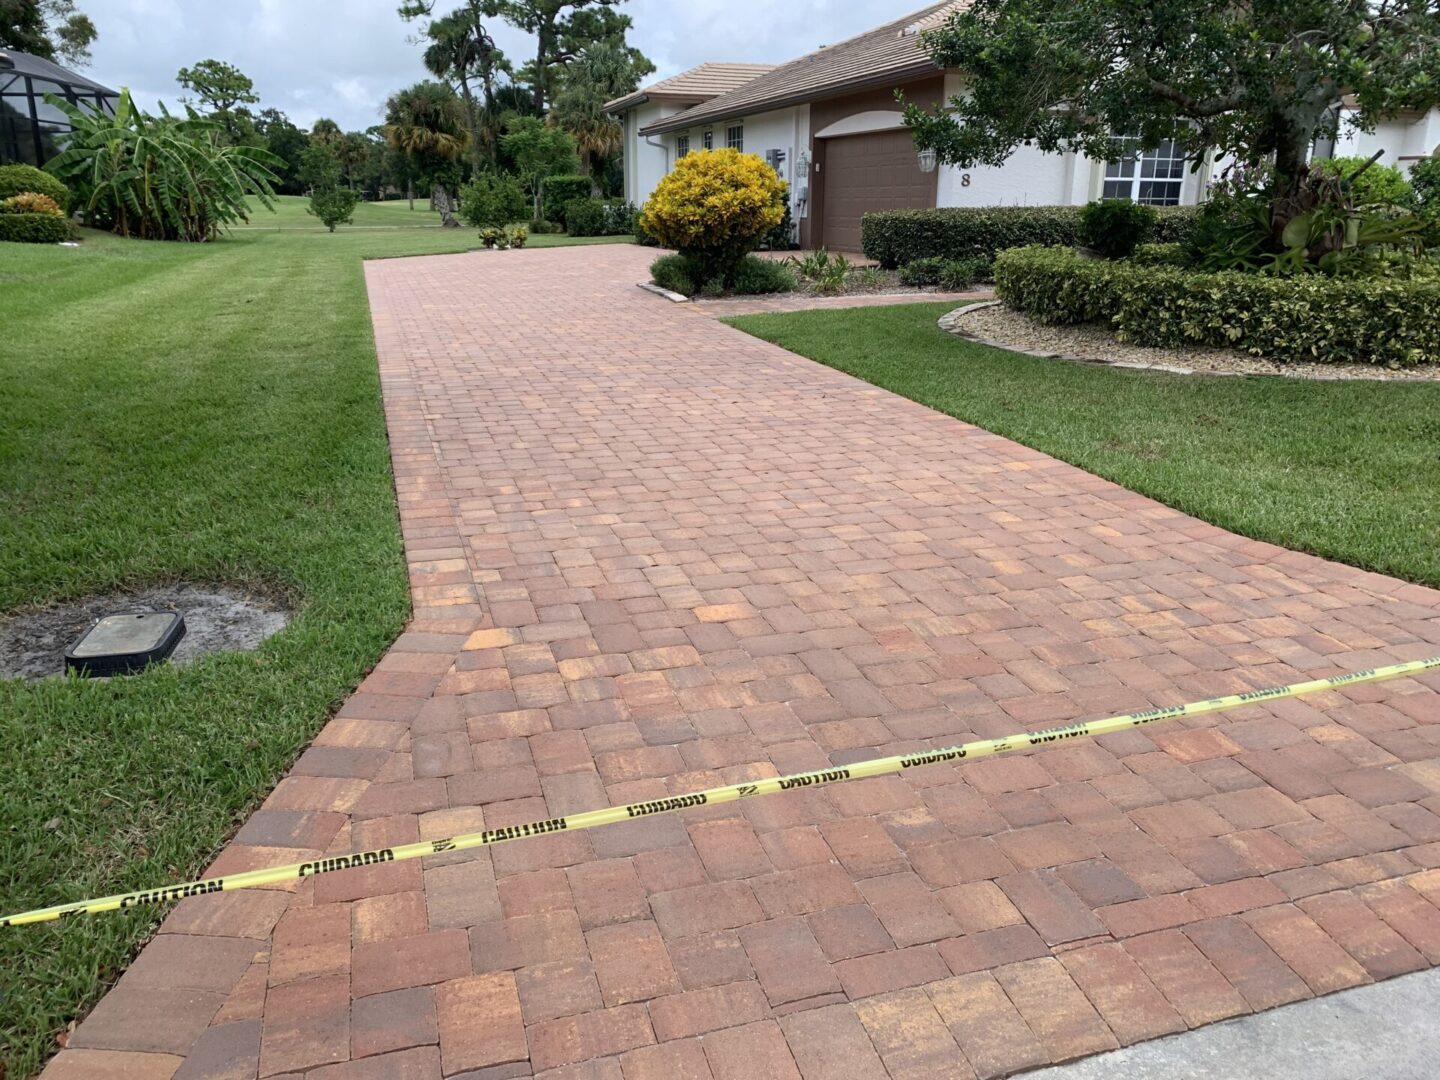 A brick-paved driveway in front of a house is blocked off with yellow caution tape. The surrounding area includes a well-manicured lawn, shrubs, and trees.